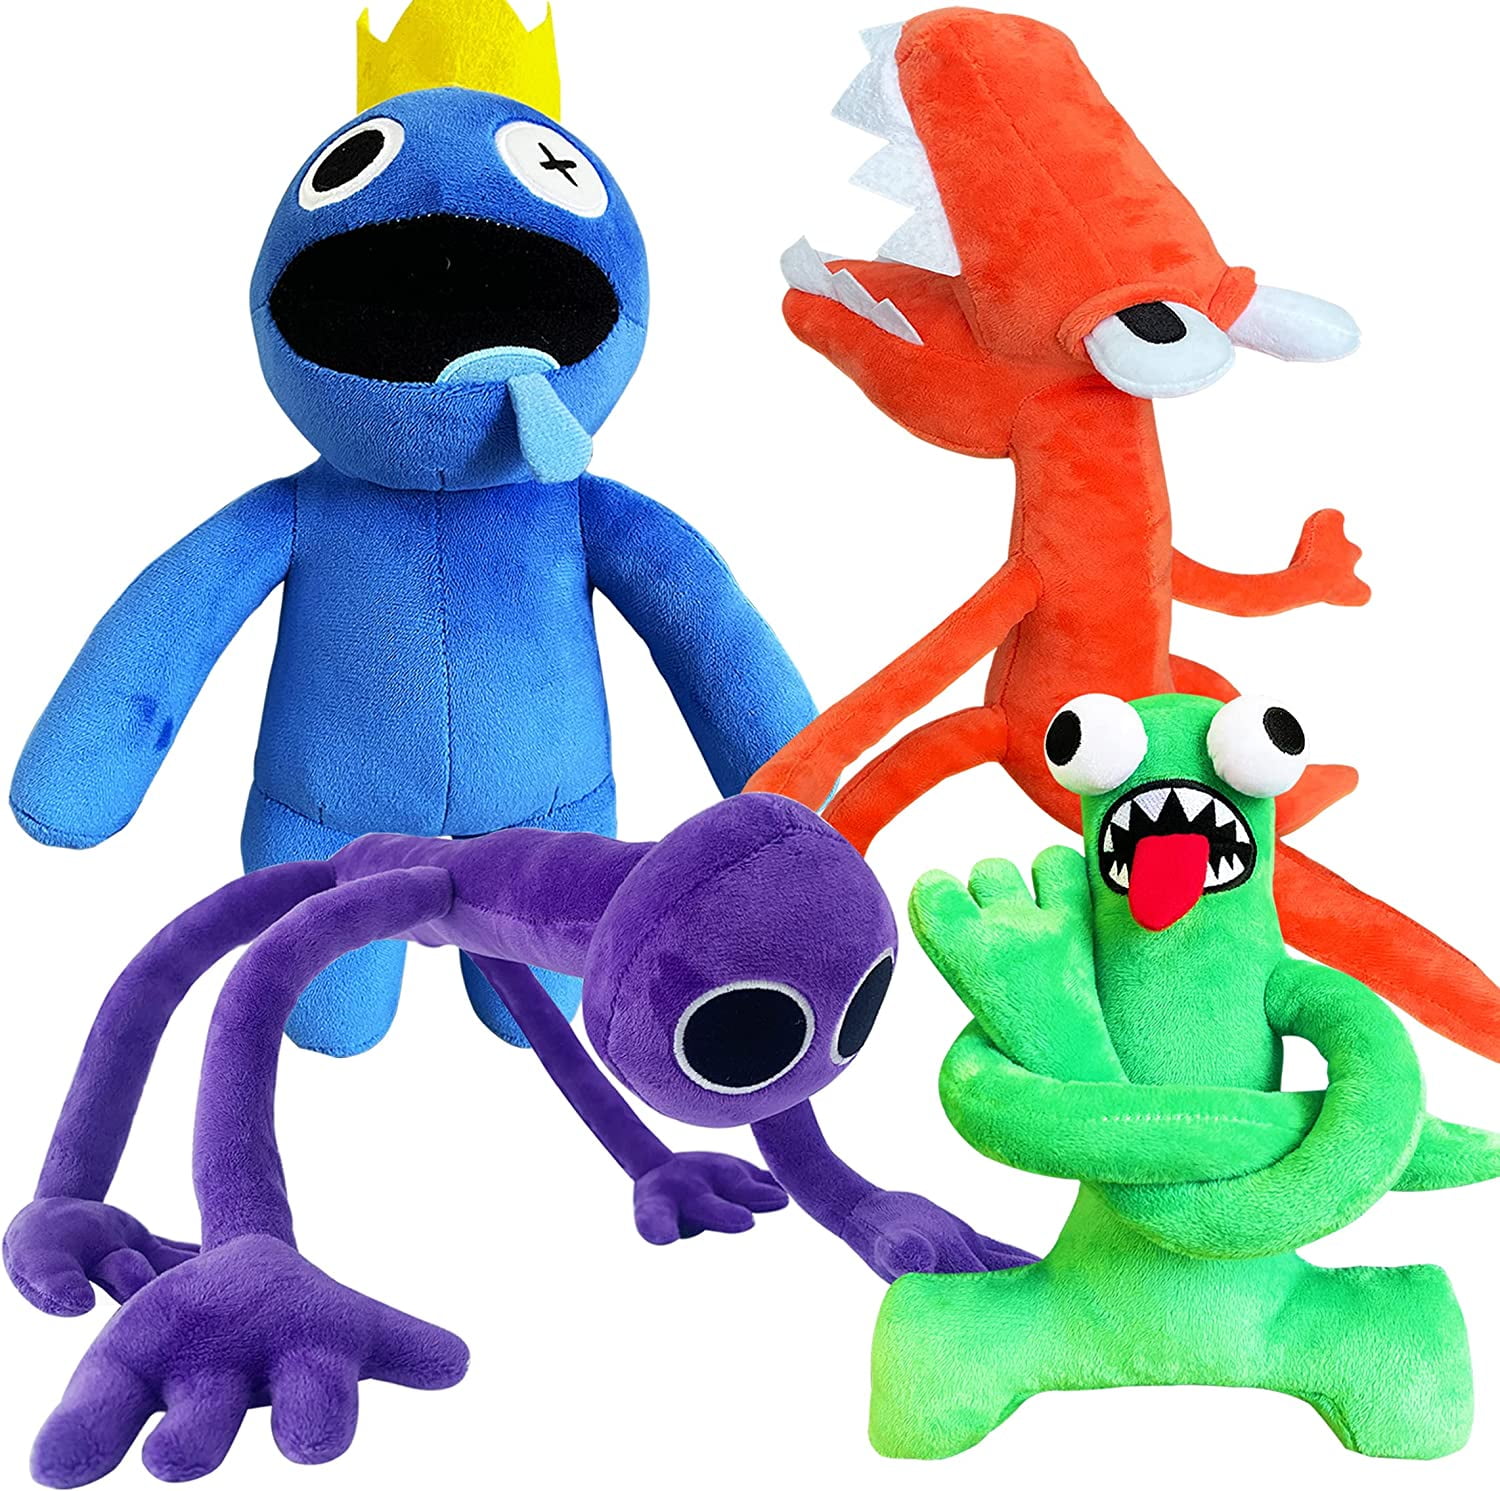 Rainbow Friends Plush Blue and Green Monster Stuffed Plushie Doll